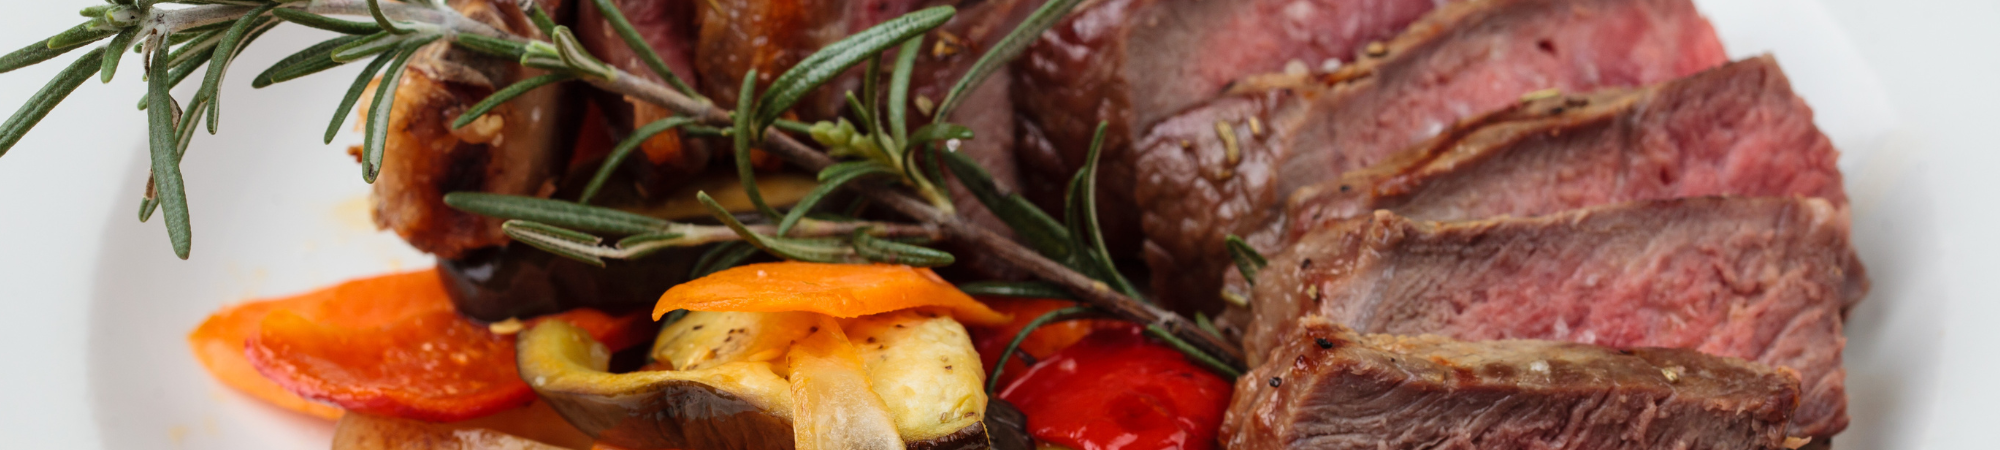 prime rib with roasted vegetables 